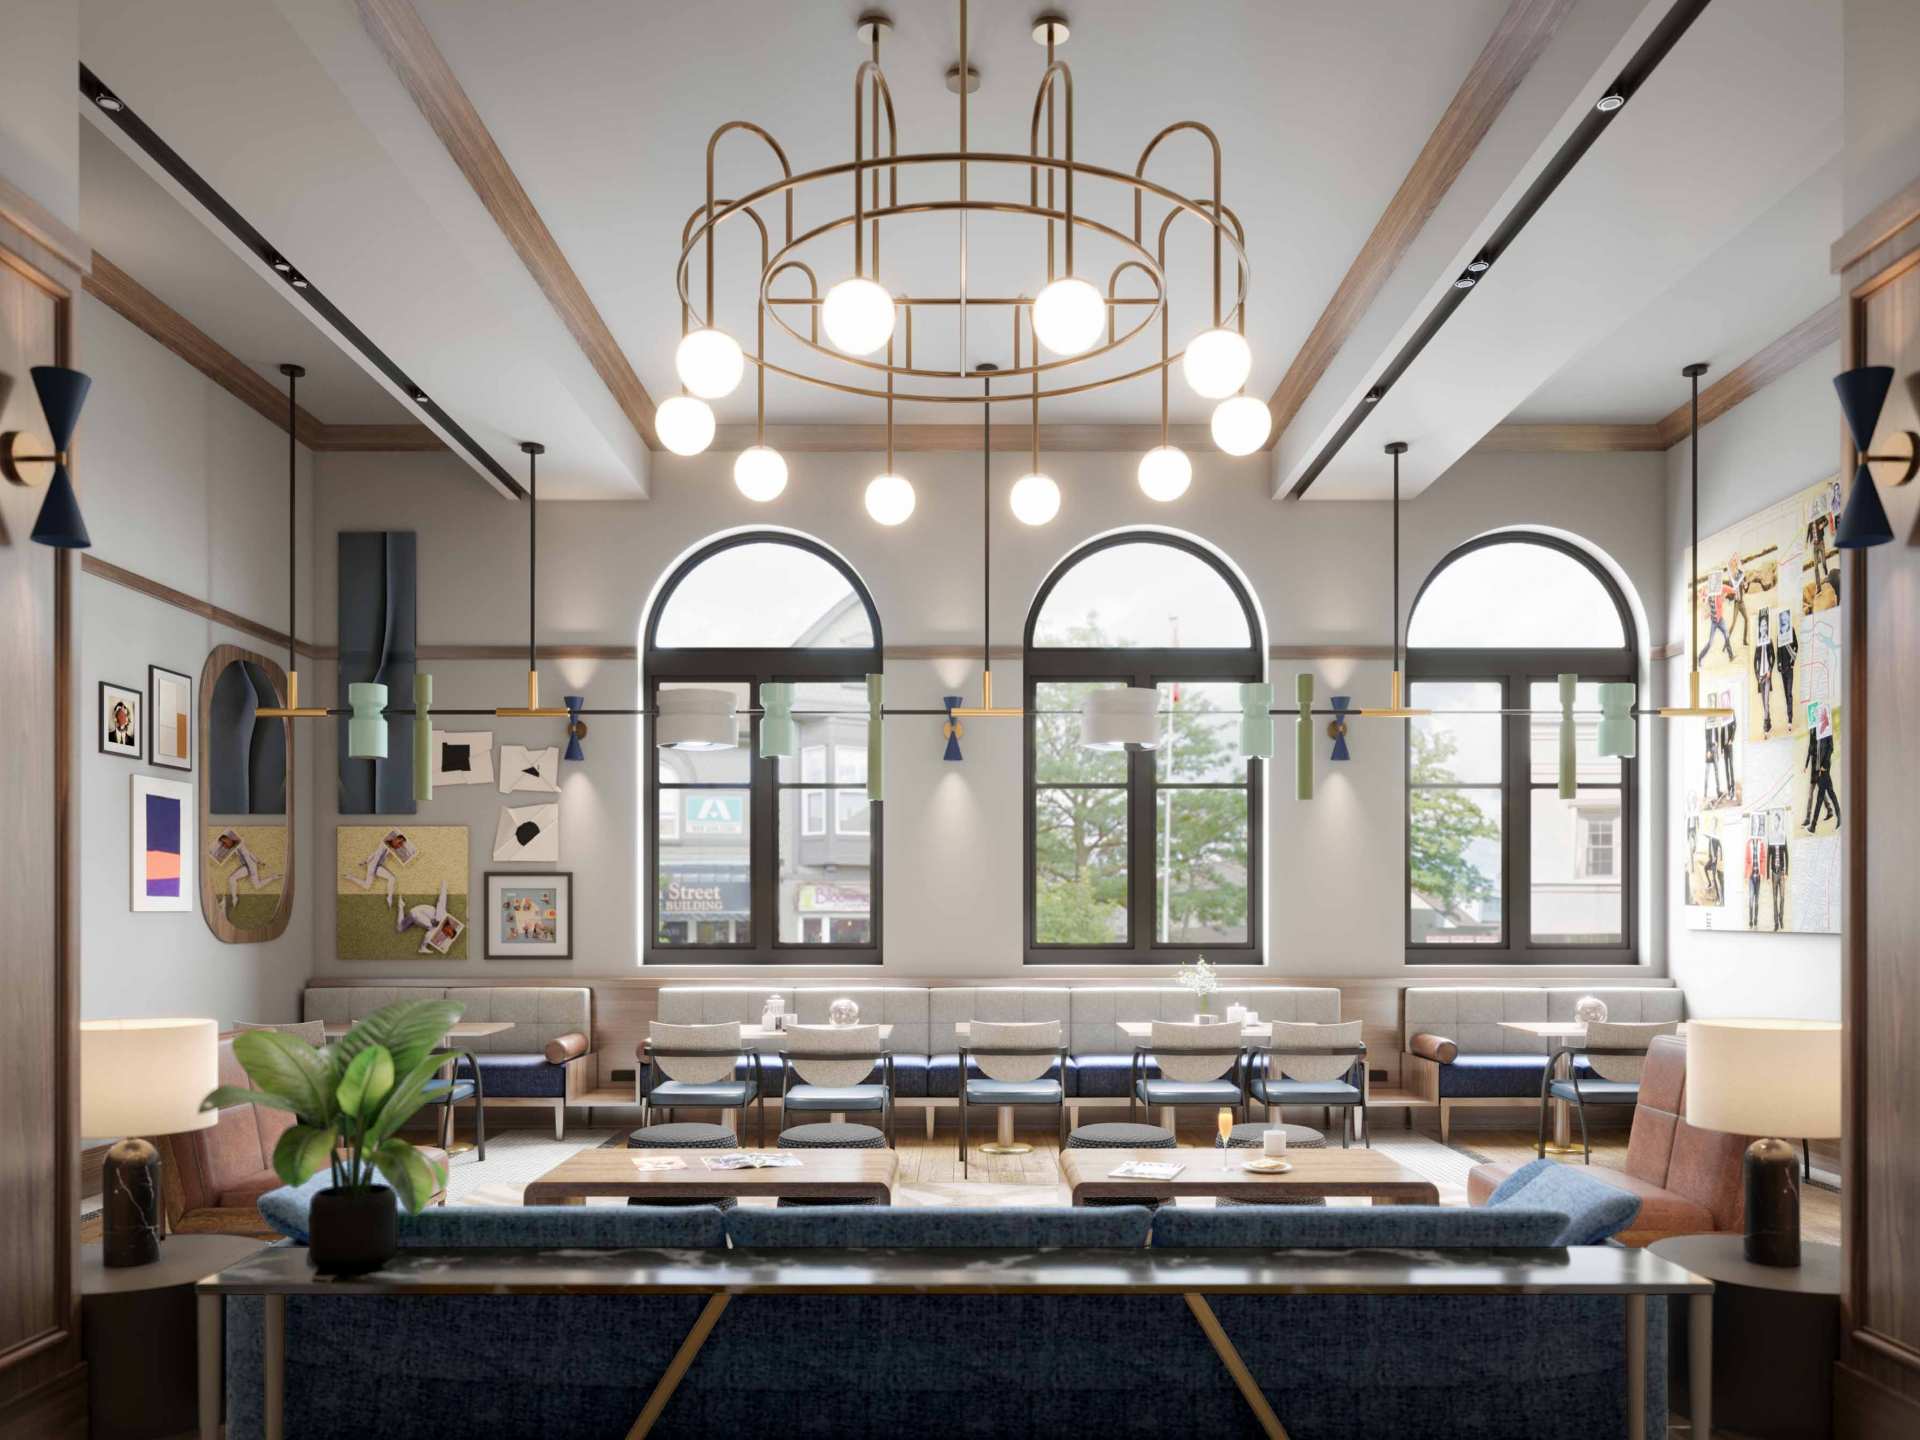 New Toronto hotels | The lobby lounge at The Postmark Hotel, Newmarket